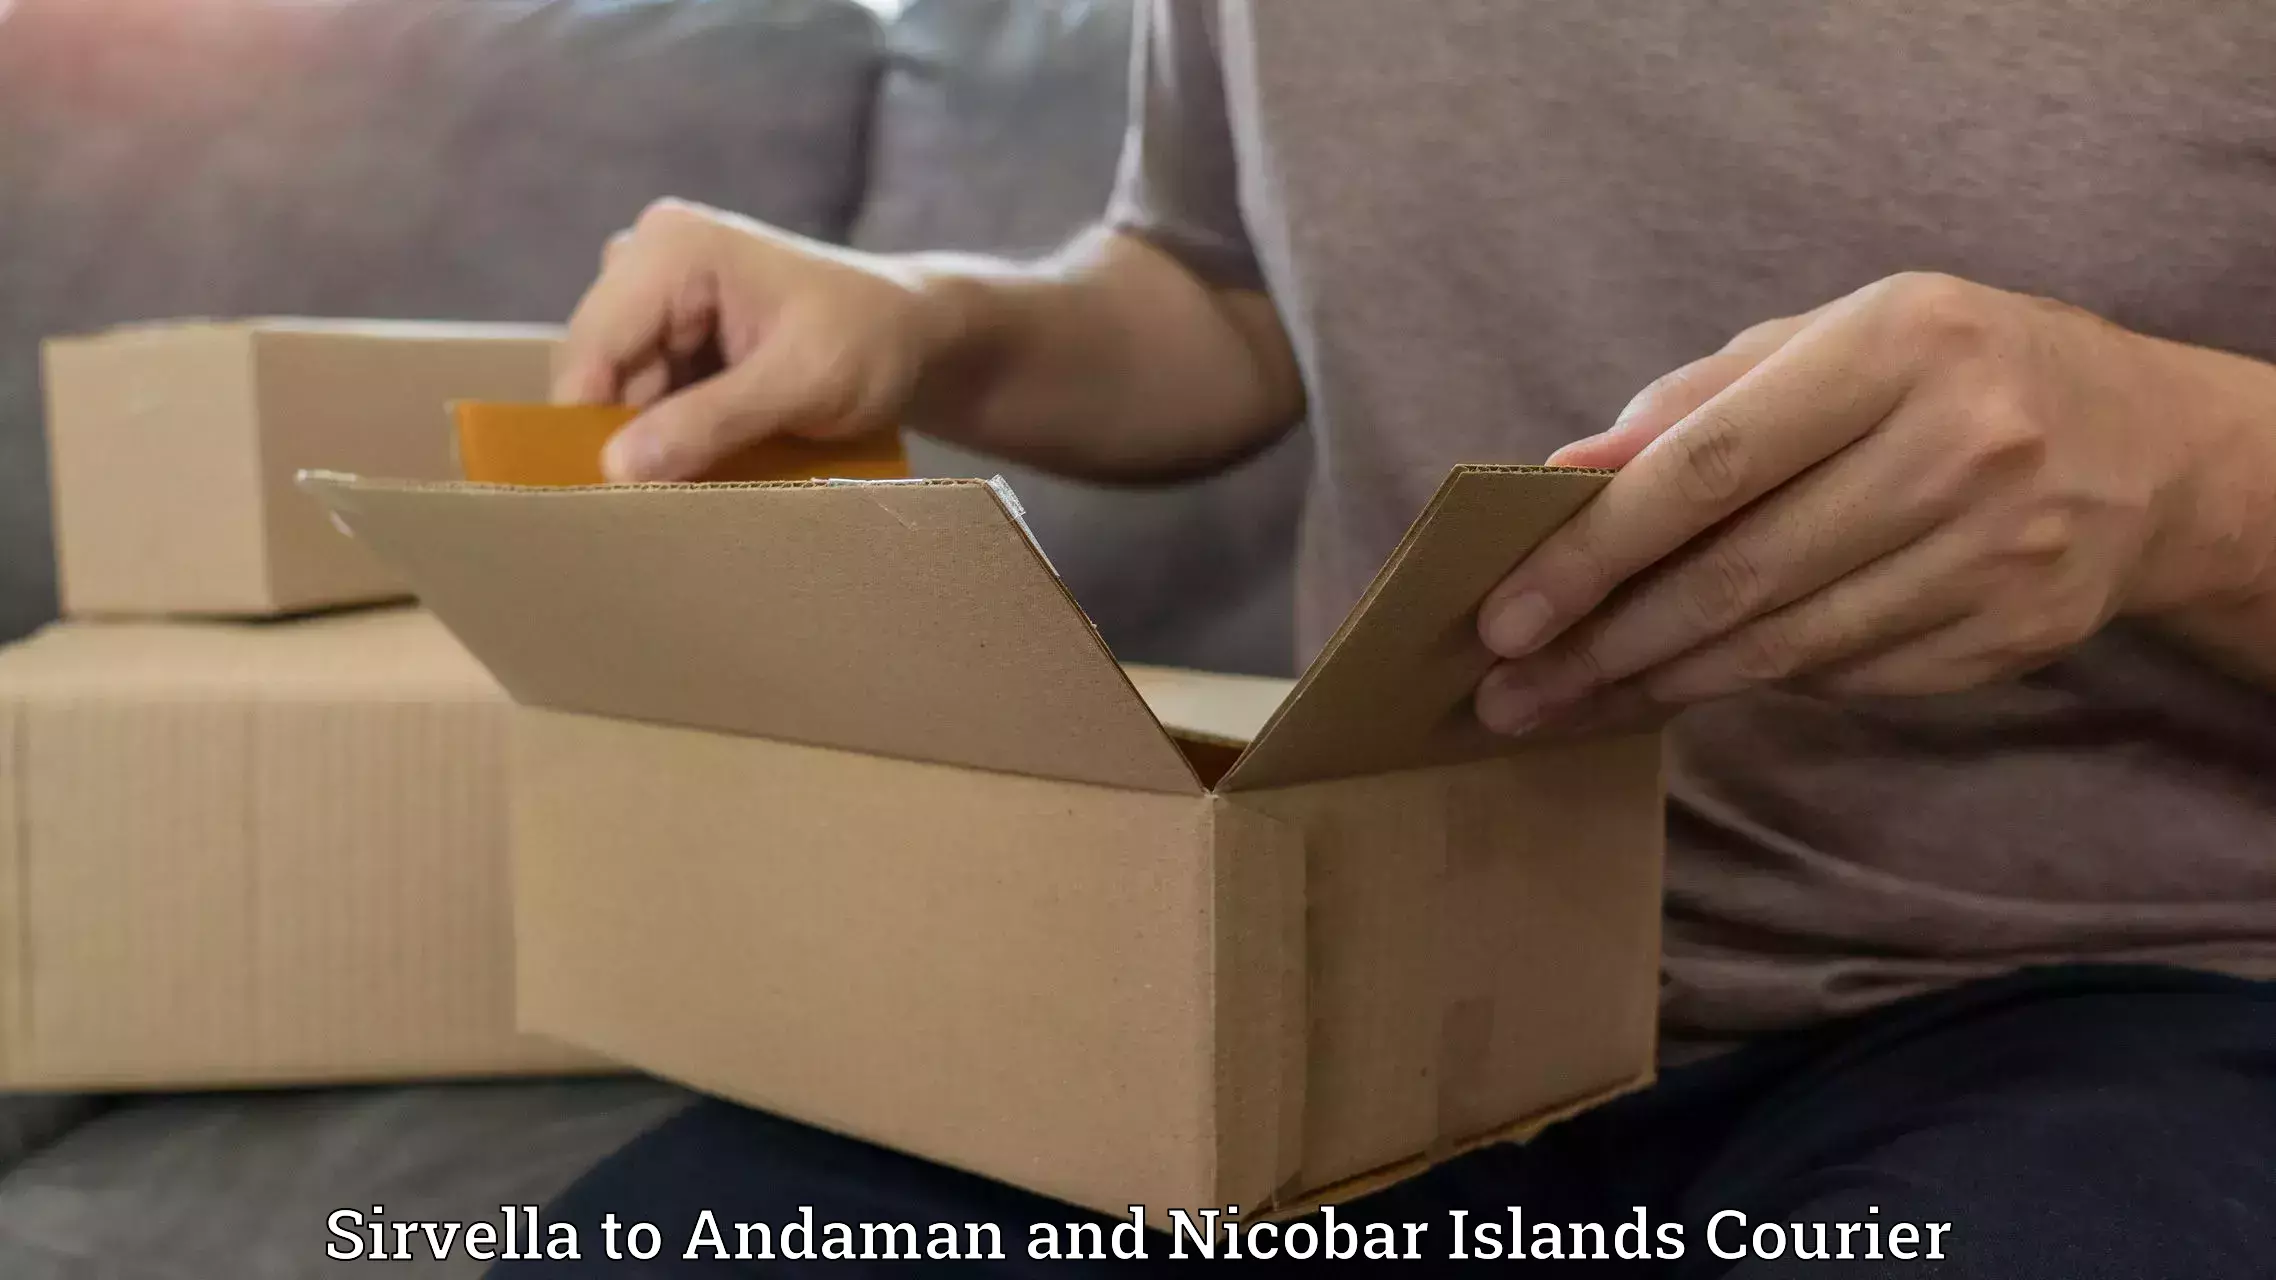 International courier networks Sirvella to Andaman and Nicobar Islands